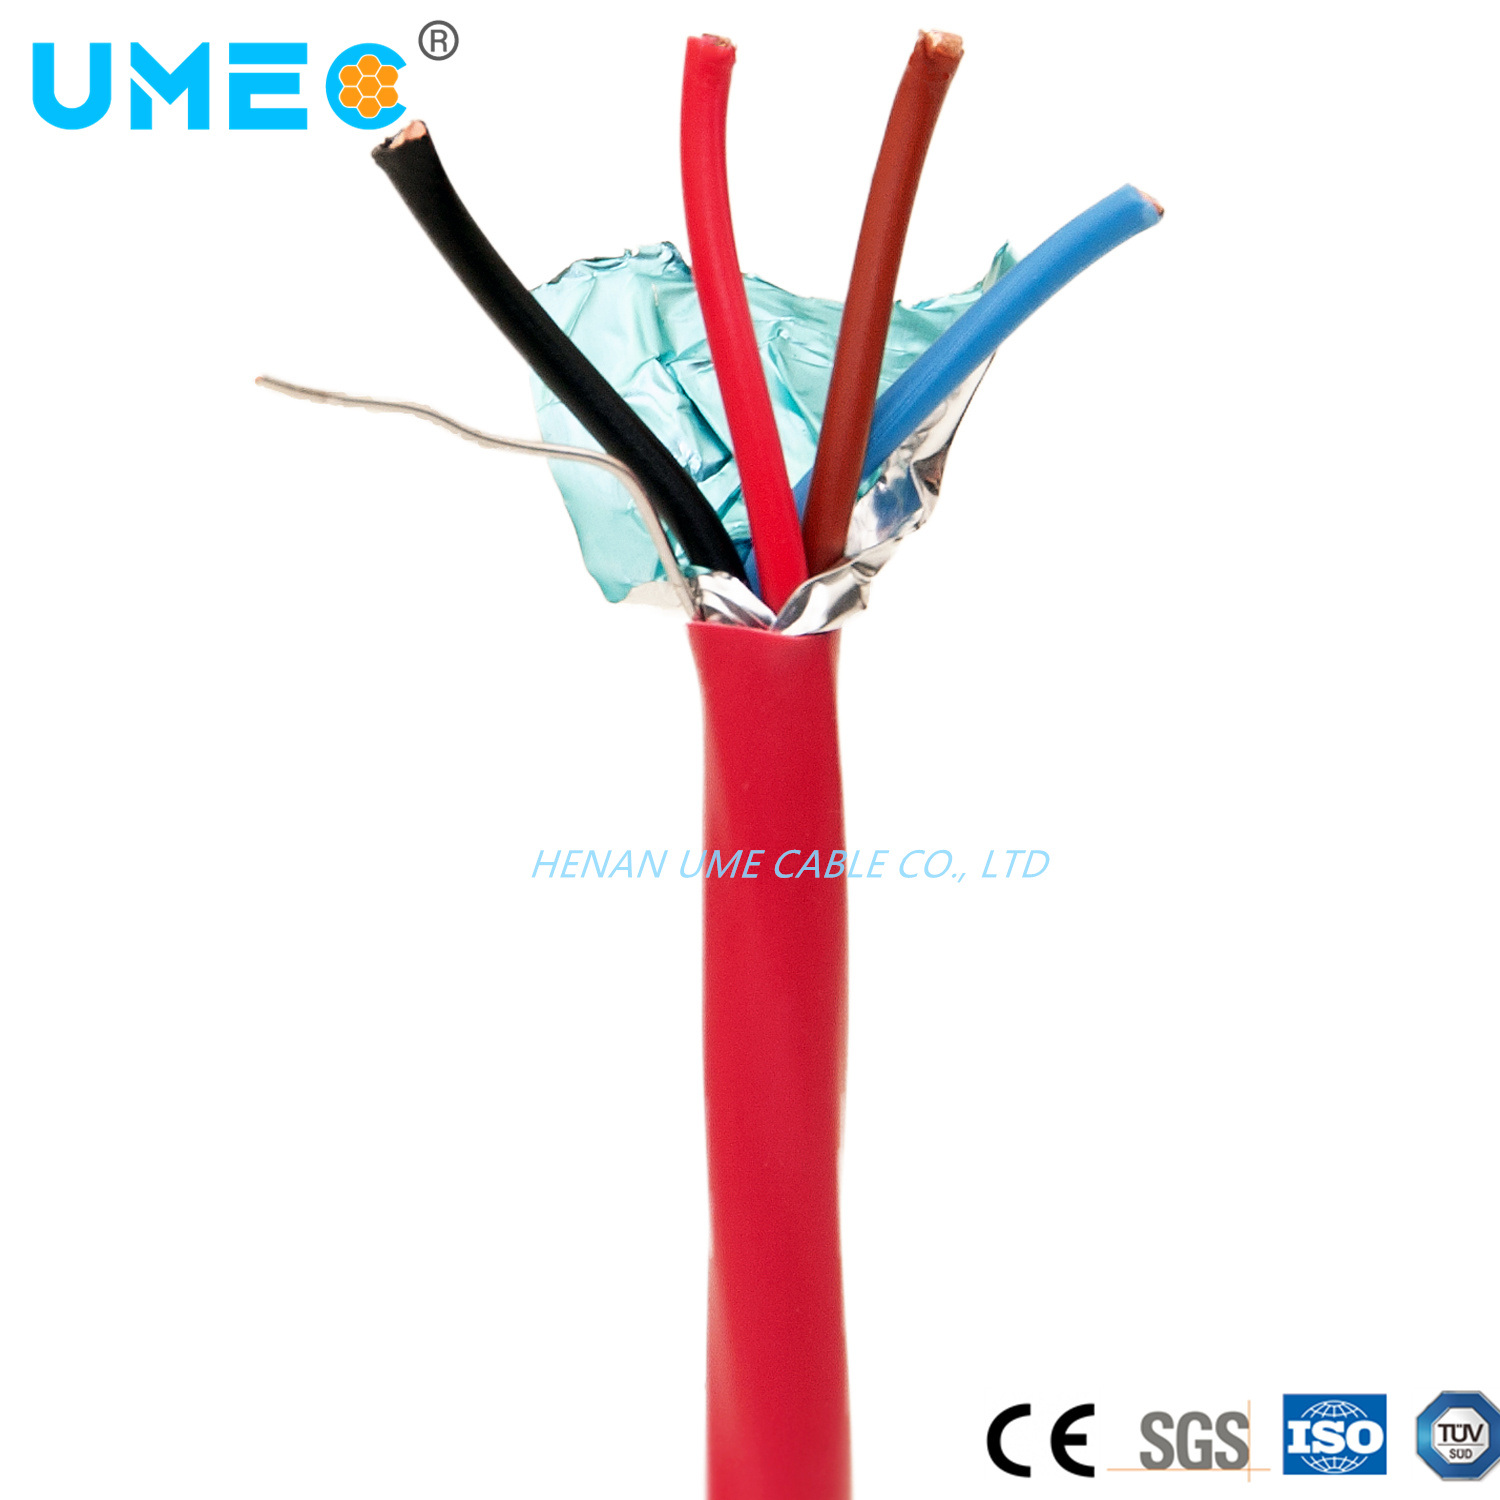 Factory Price PVC Jacket 2 4 6 8 Core Fire Alarm Cable Specification Security Rated Cable Alarm Cable Wire